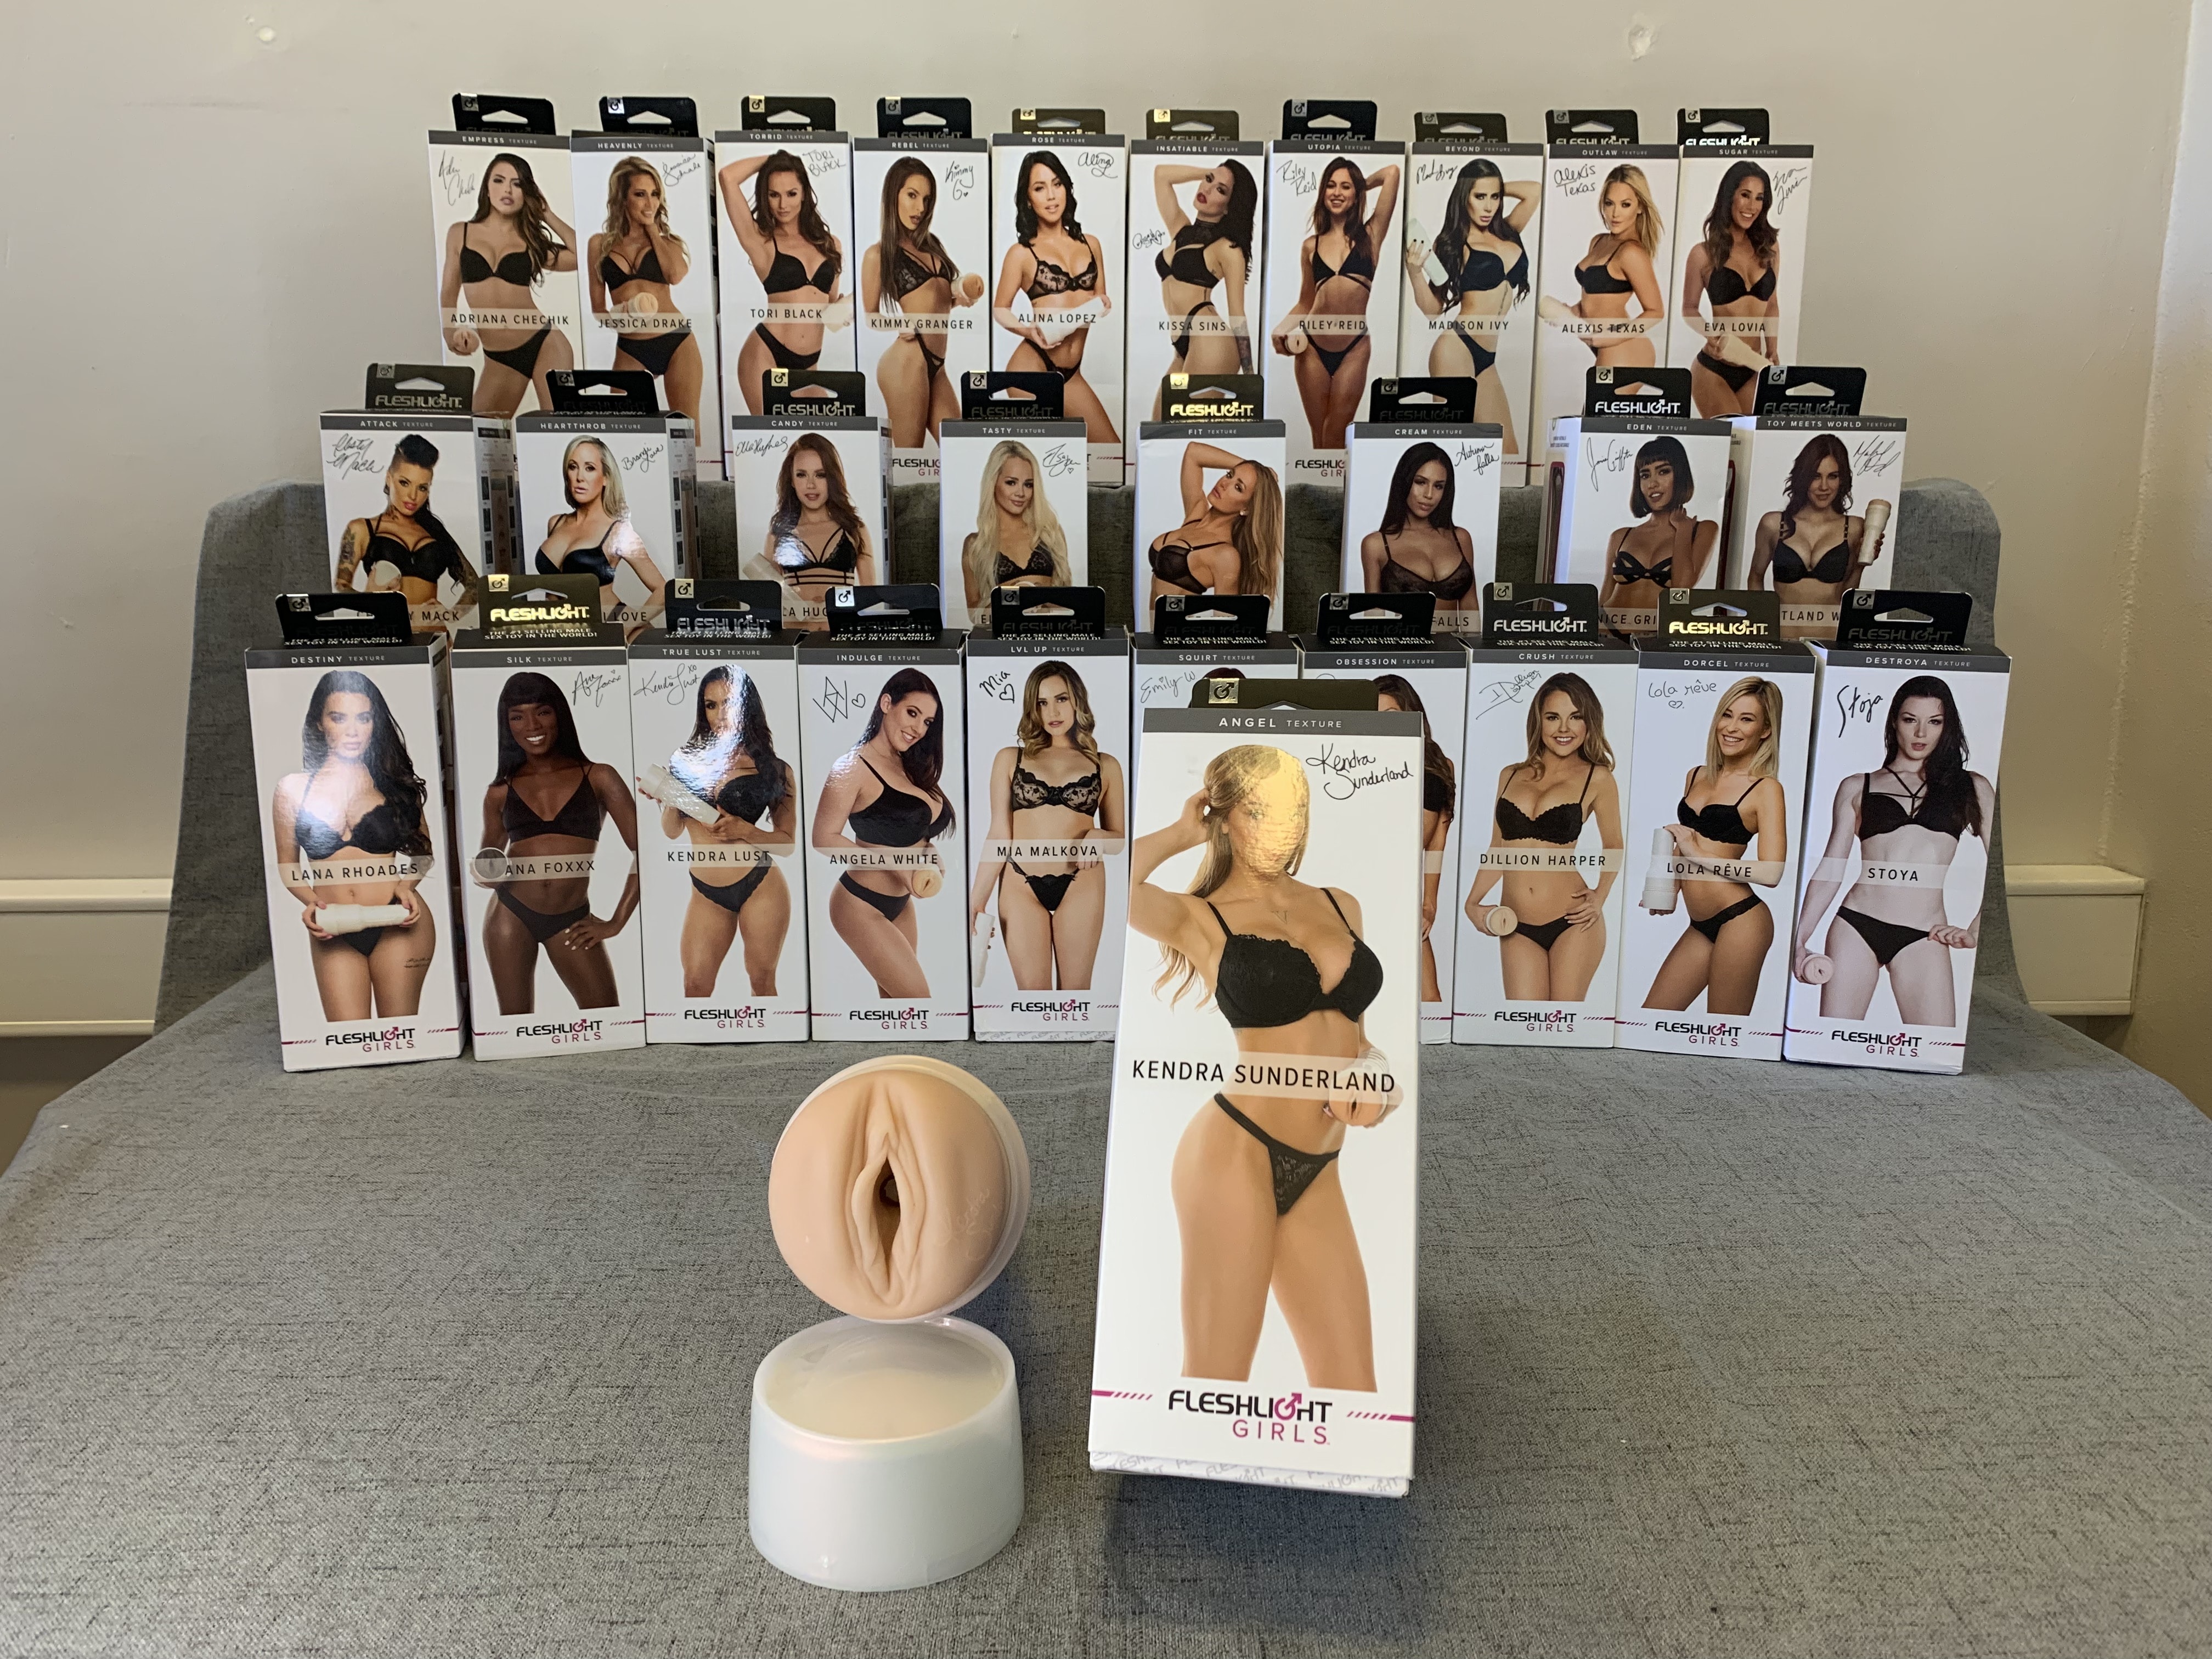 My Personal Experiences with Kendra Sunderland Fleshlight Angel 